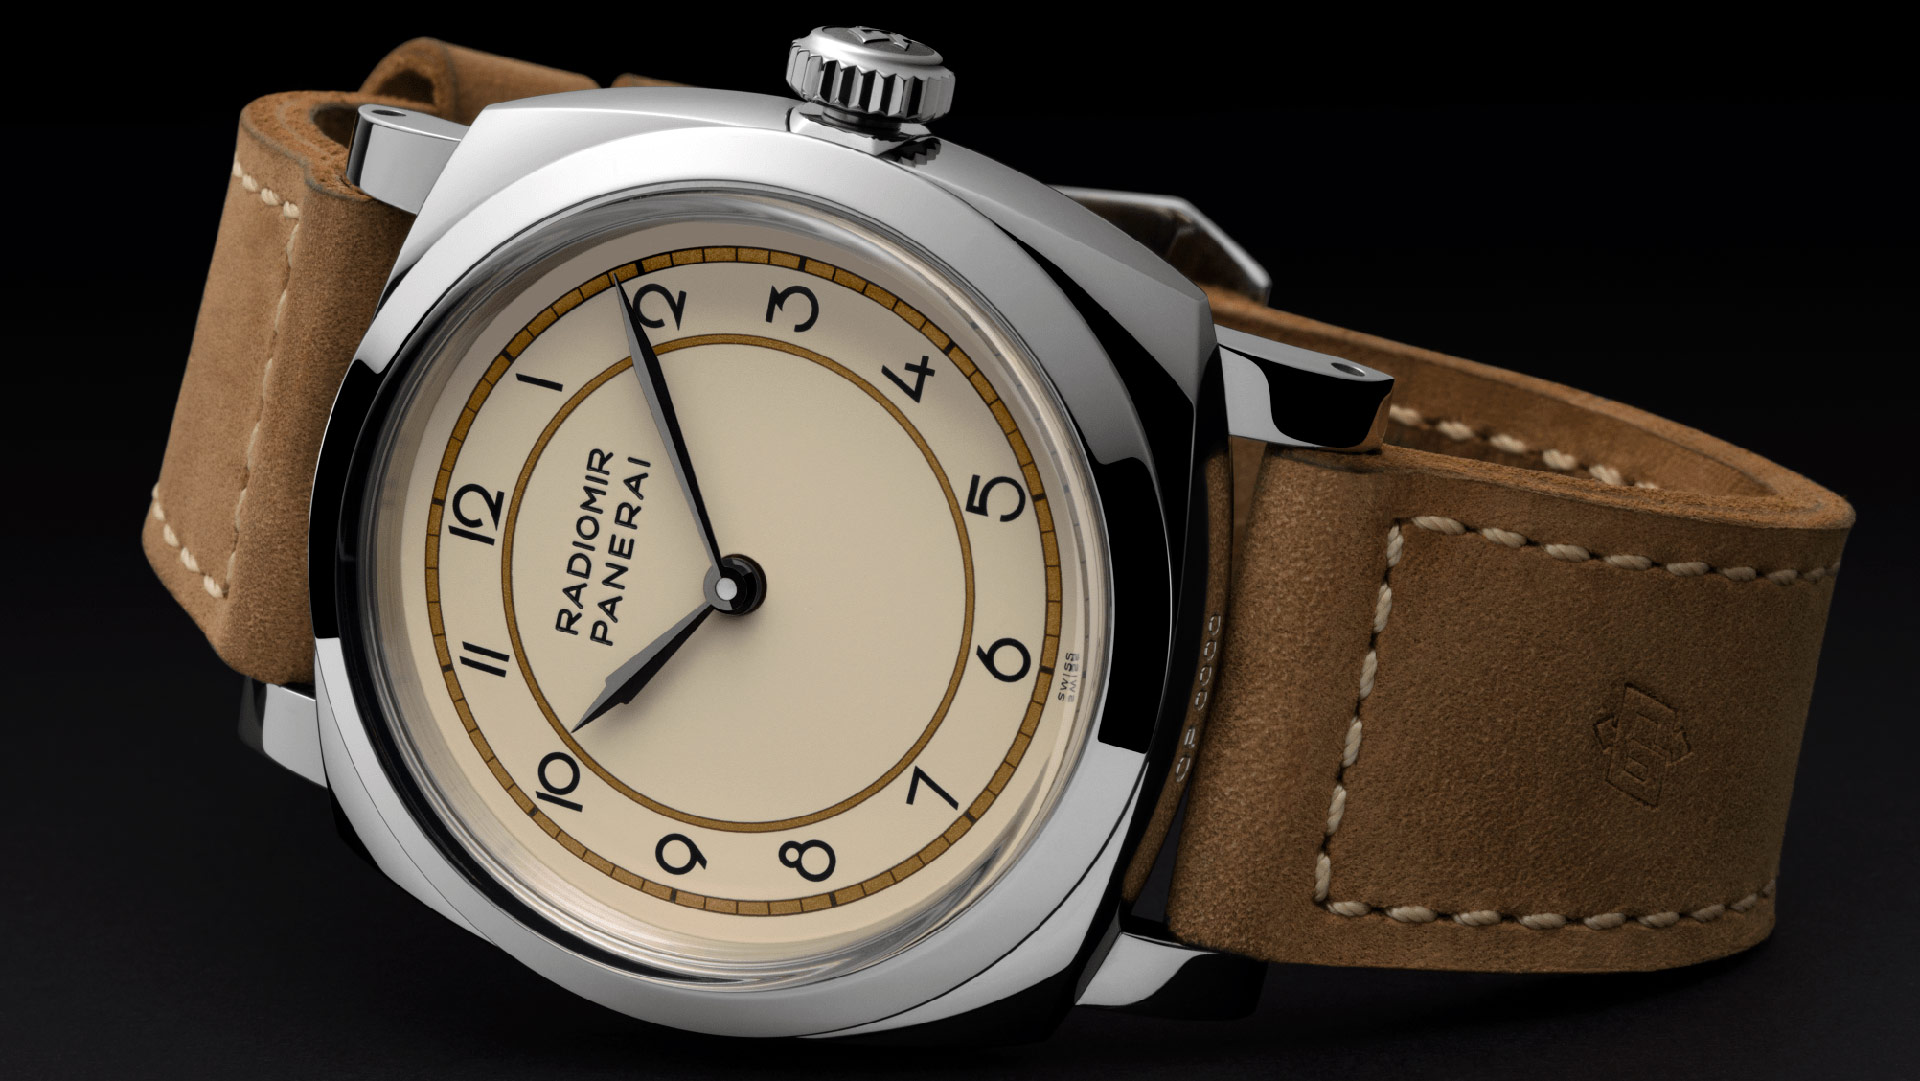 Panerai Radiomir 1940 Art Deco Dial PAM790 & PAM791 Limited Edition Watches